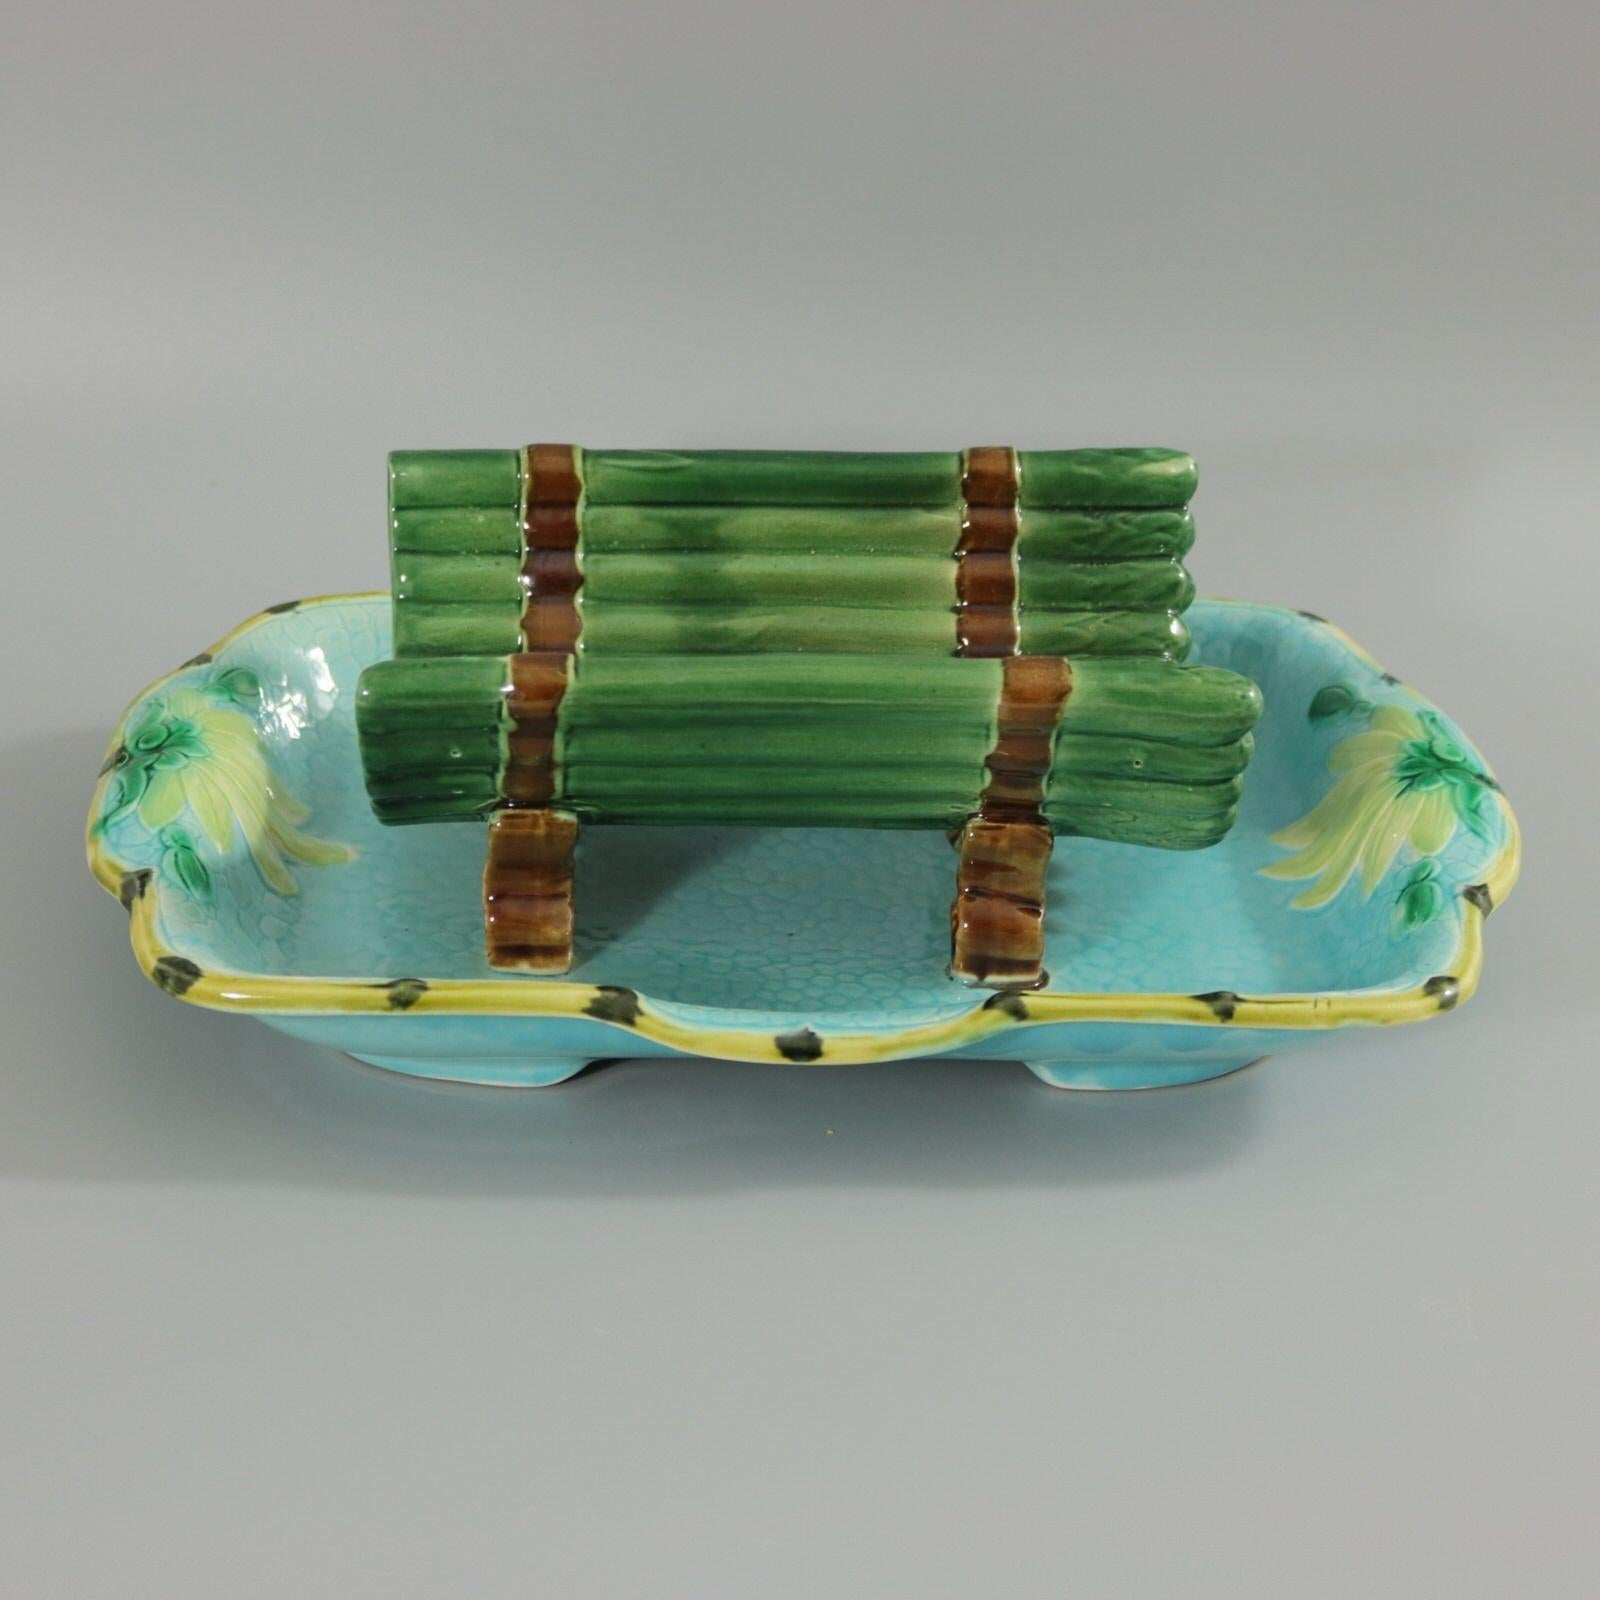 Holdcroft Majolica asparagus drainer which features asparagus tips bound together, sat on a rectangular tray. The tray with floral handles. Coloration: turquoise, green, brown, are predominant.